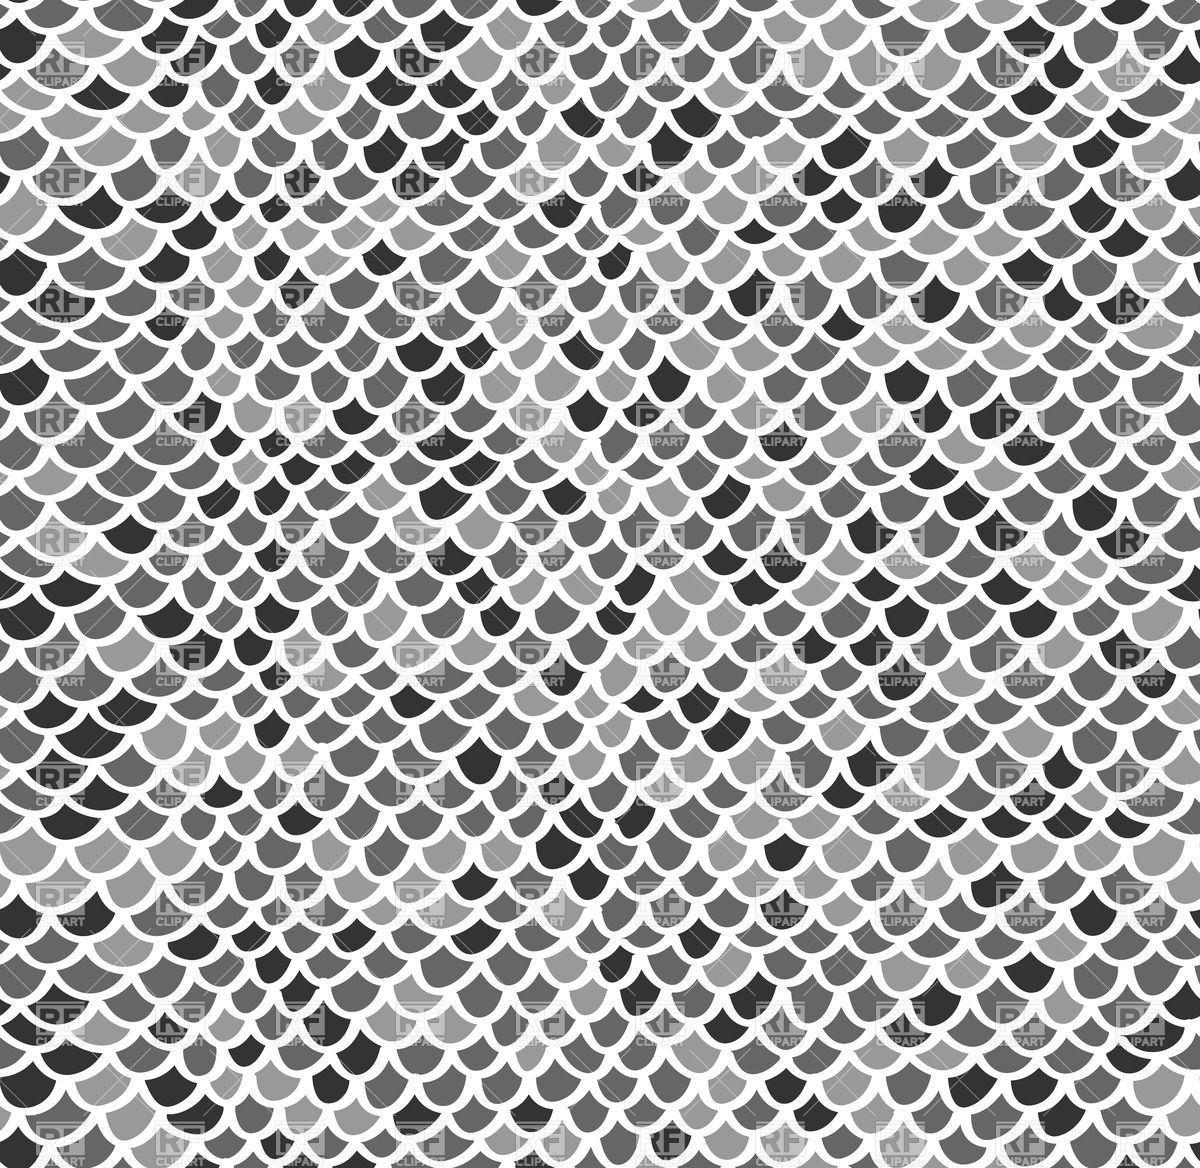 Scale Seamless Mosaic Pattern In Gray Colors Backgrounds Textures